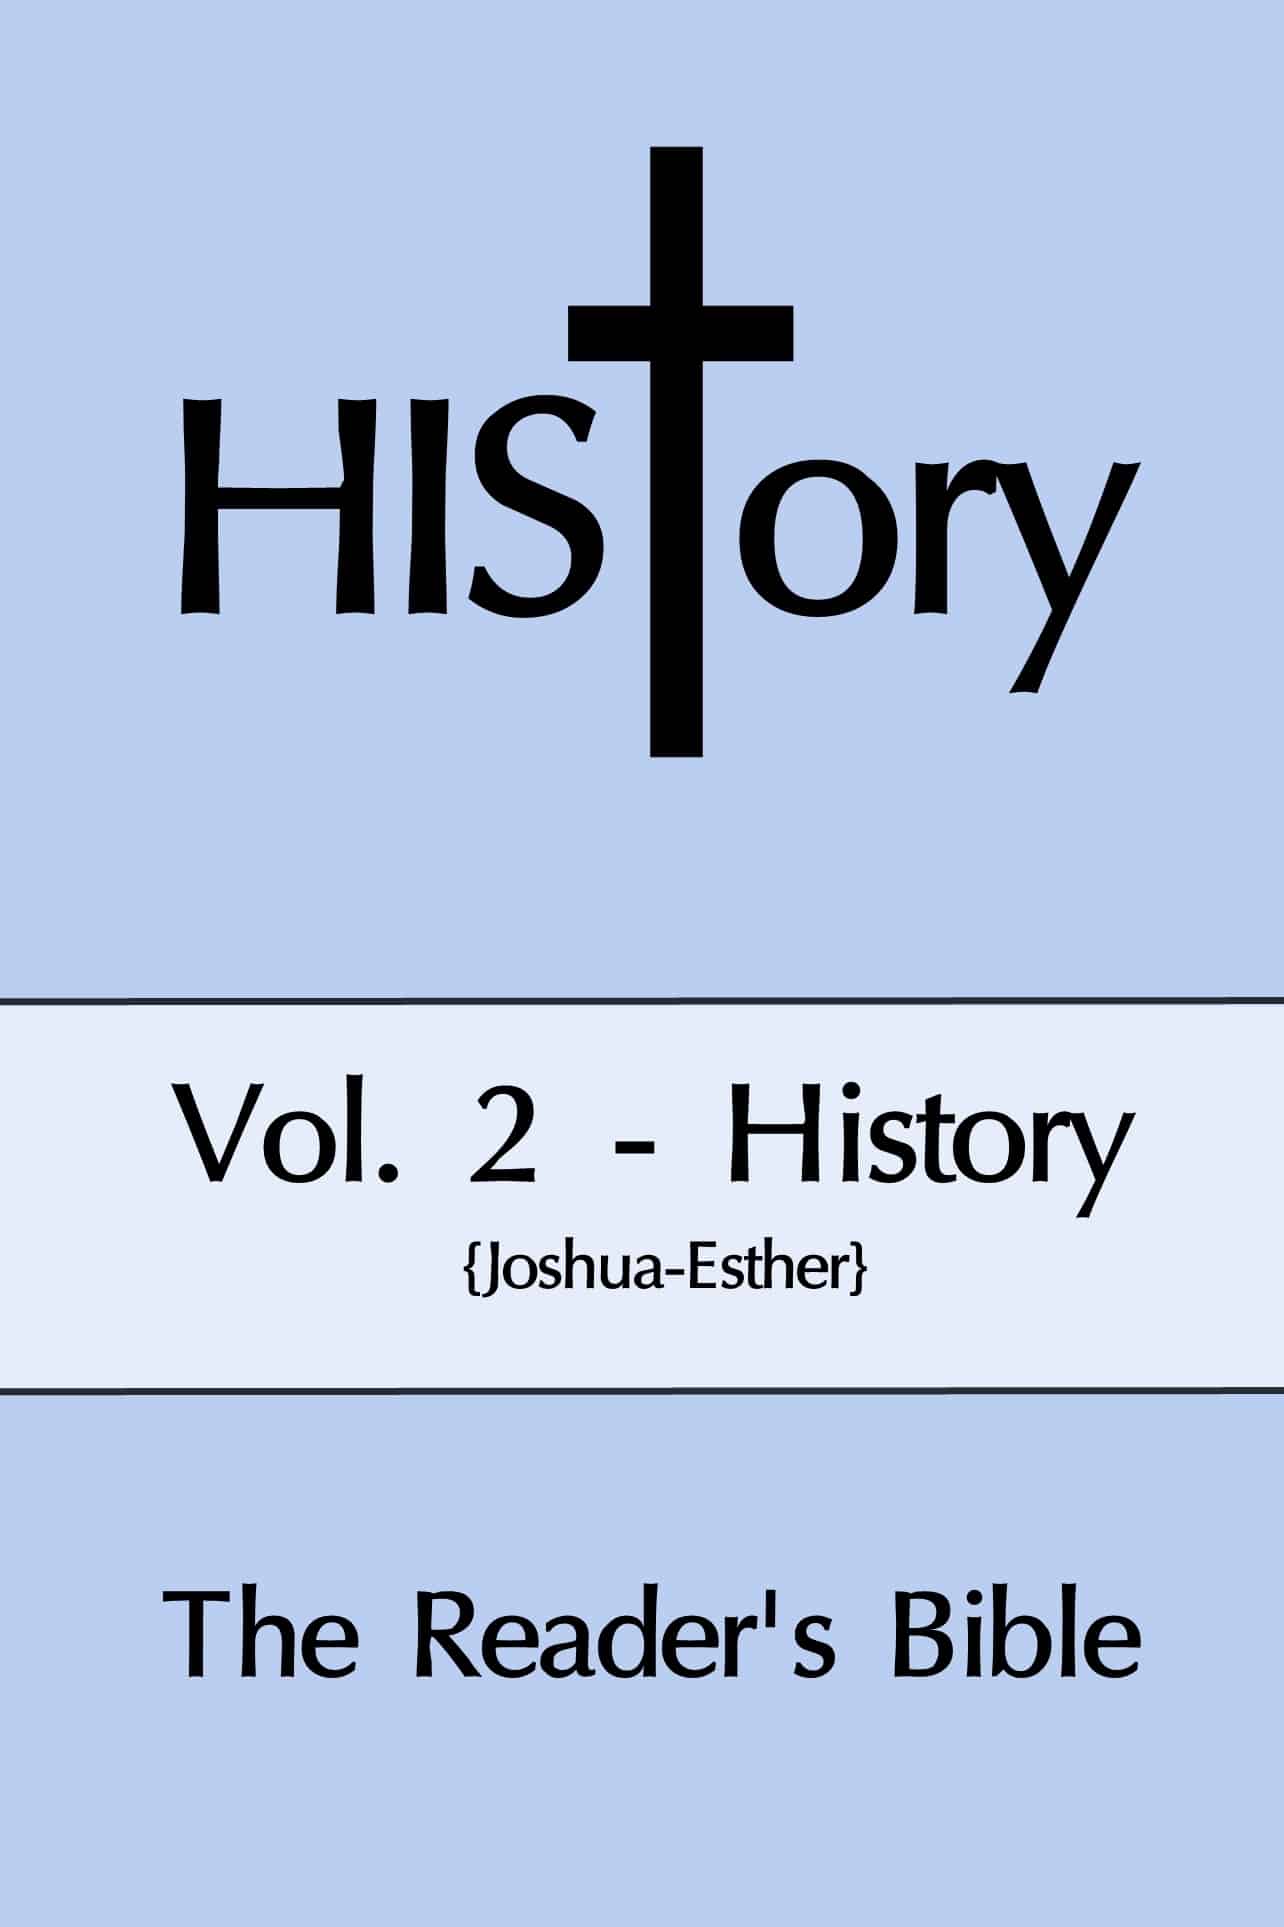 HIStory: The Reader’s Bible Vol. 2 Available + FREE PDF file to download!